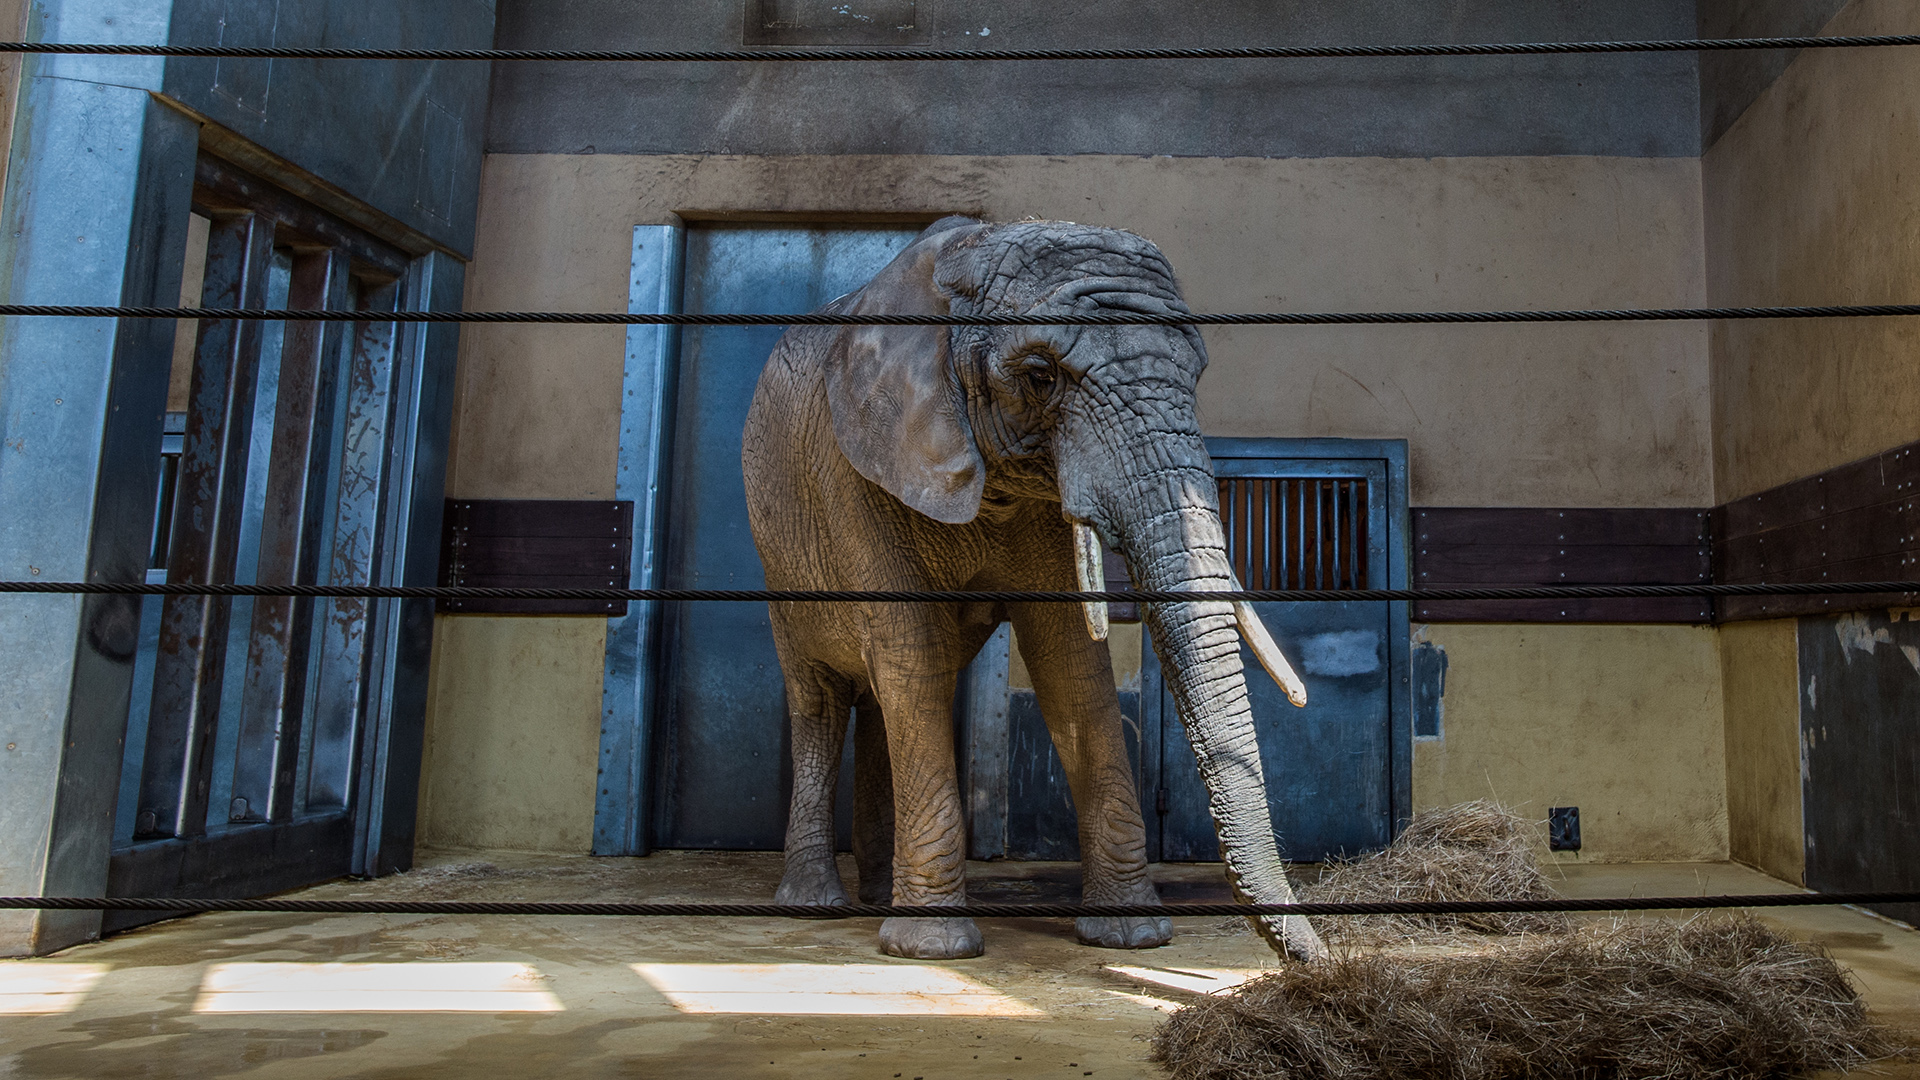 An elephant in a small indoor zoo enclosure